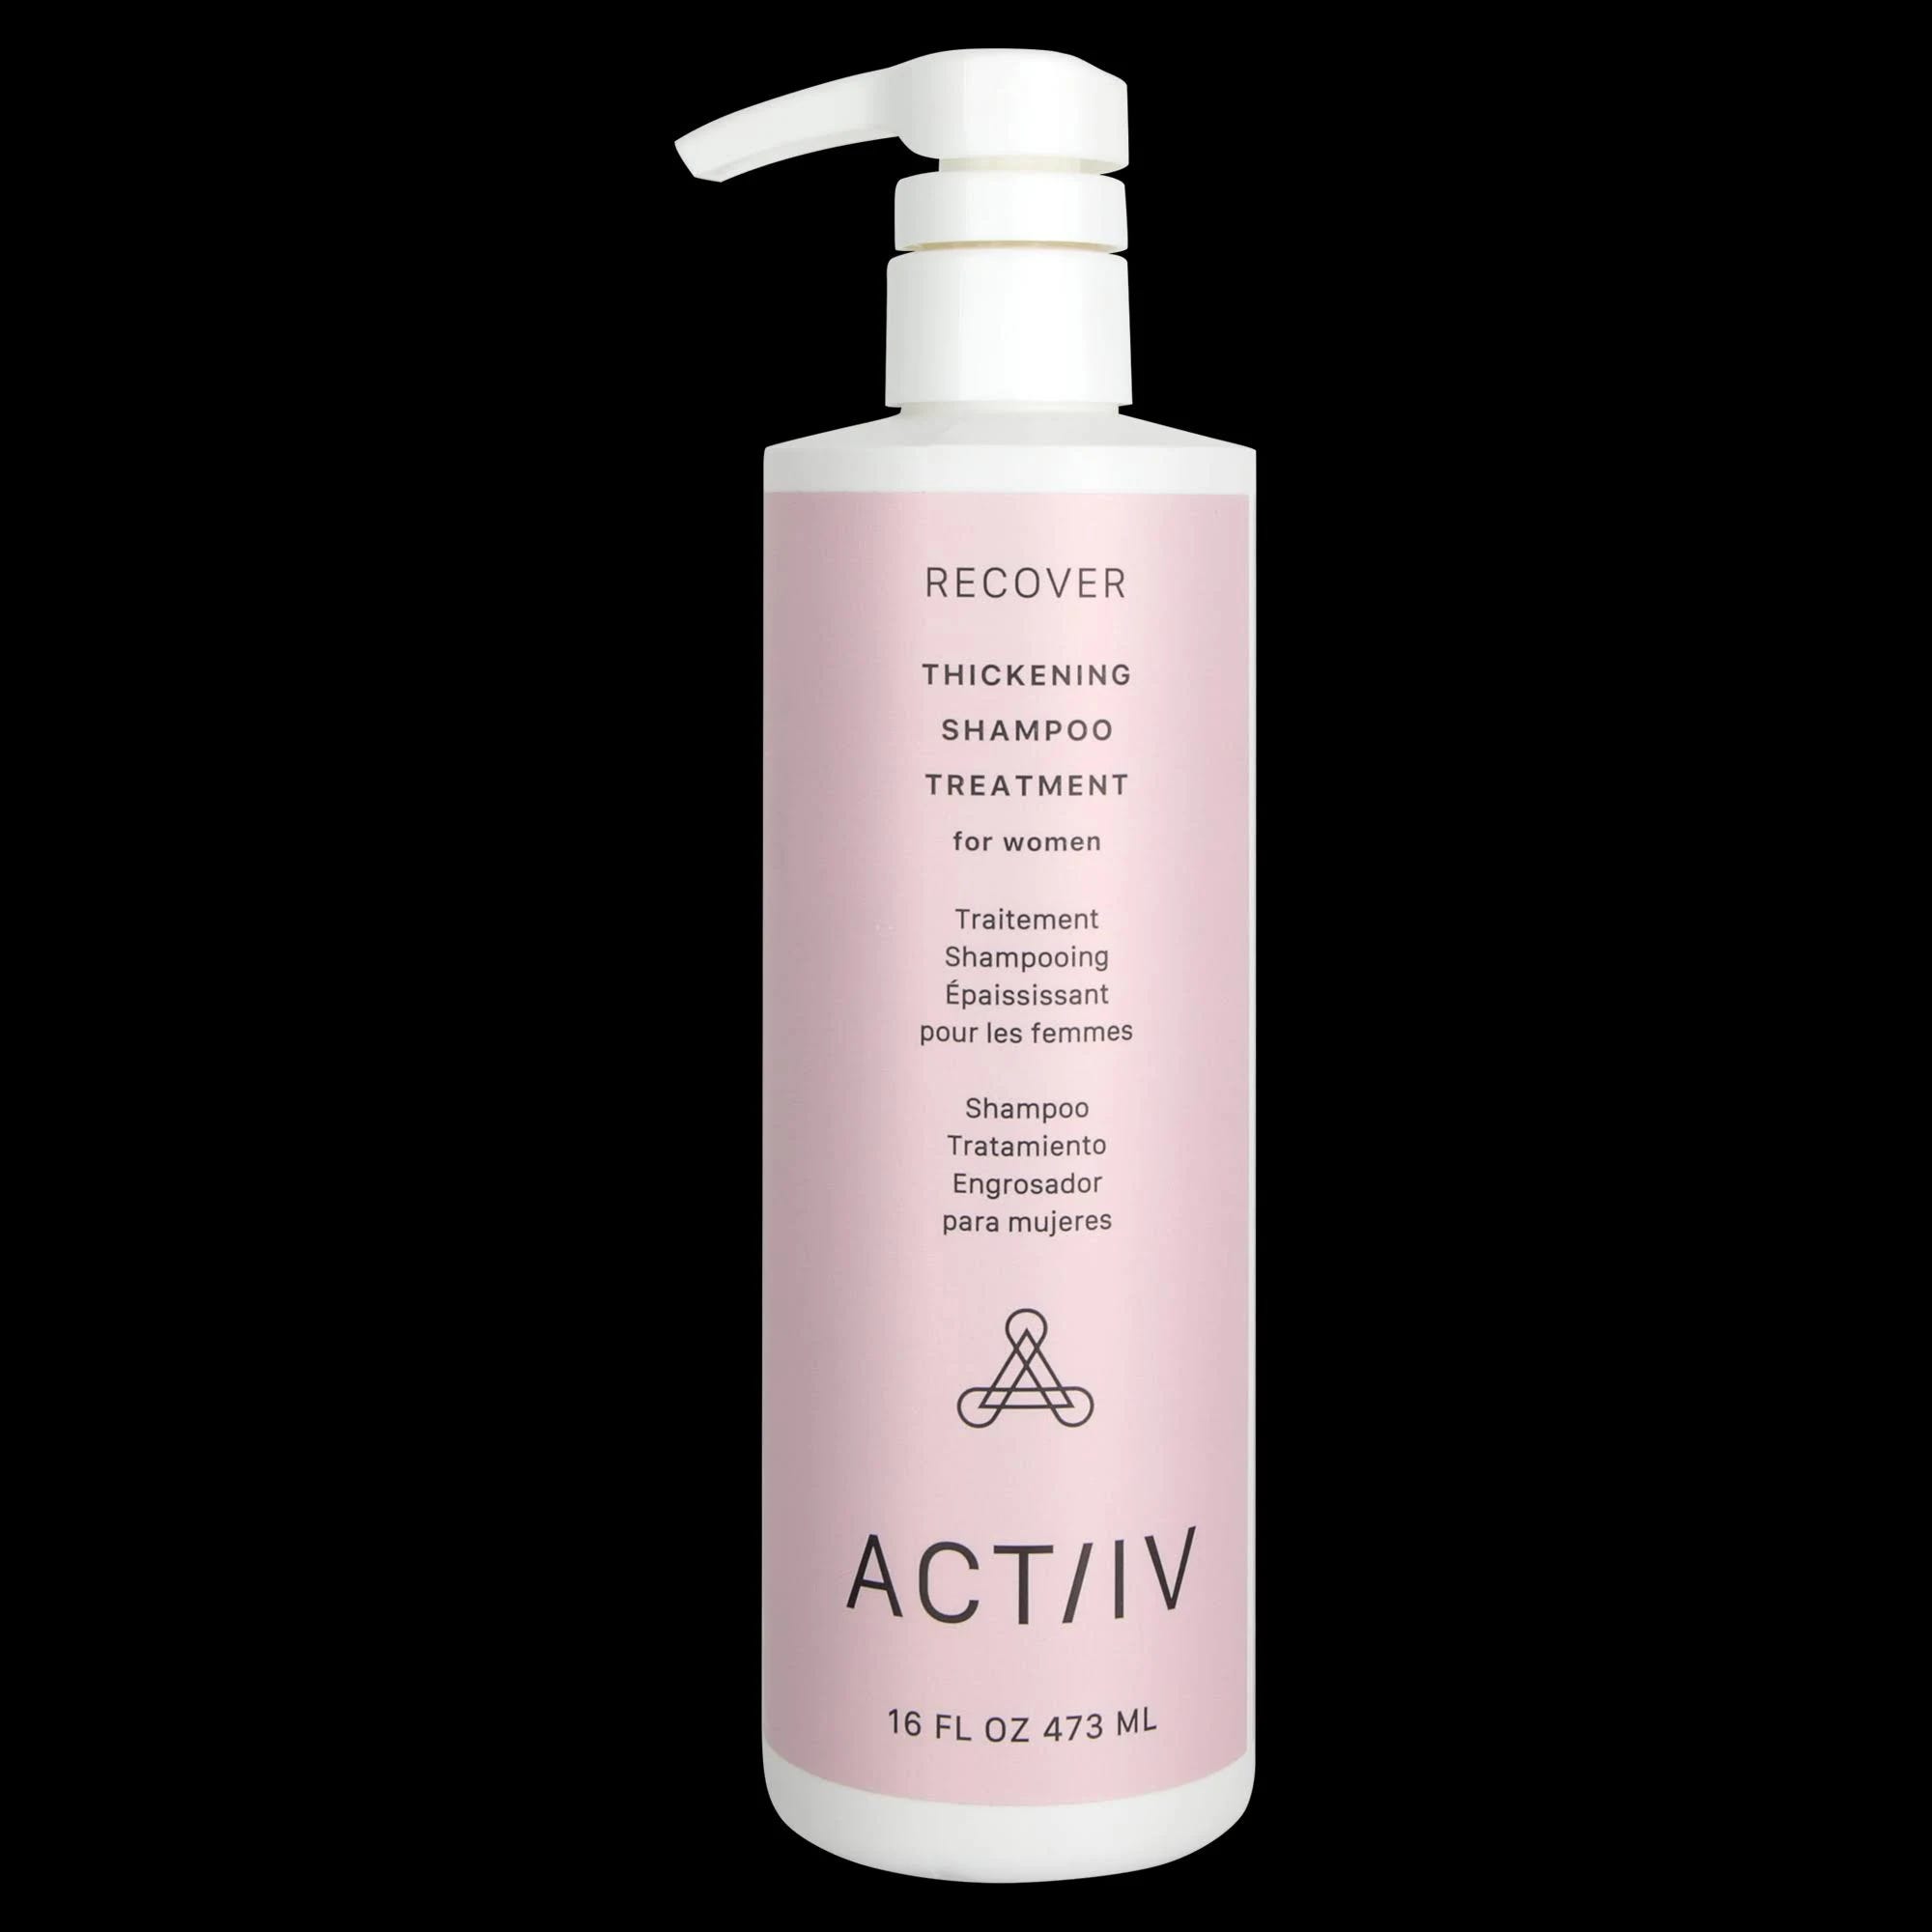 Actiiv Recover Thickening Shampoo Treatment: 16 oz for Hair Loss Prevention | Image